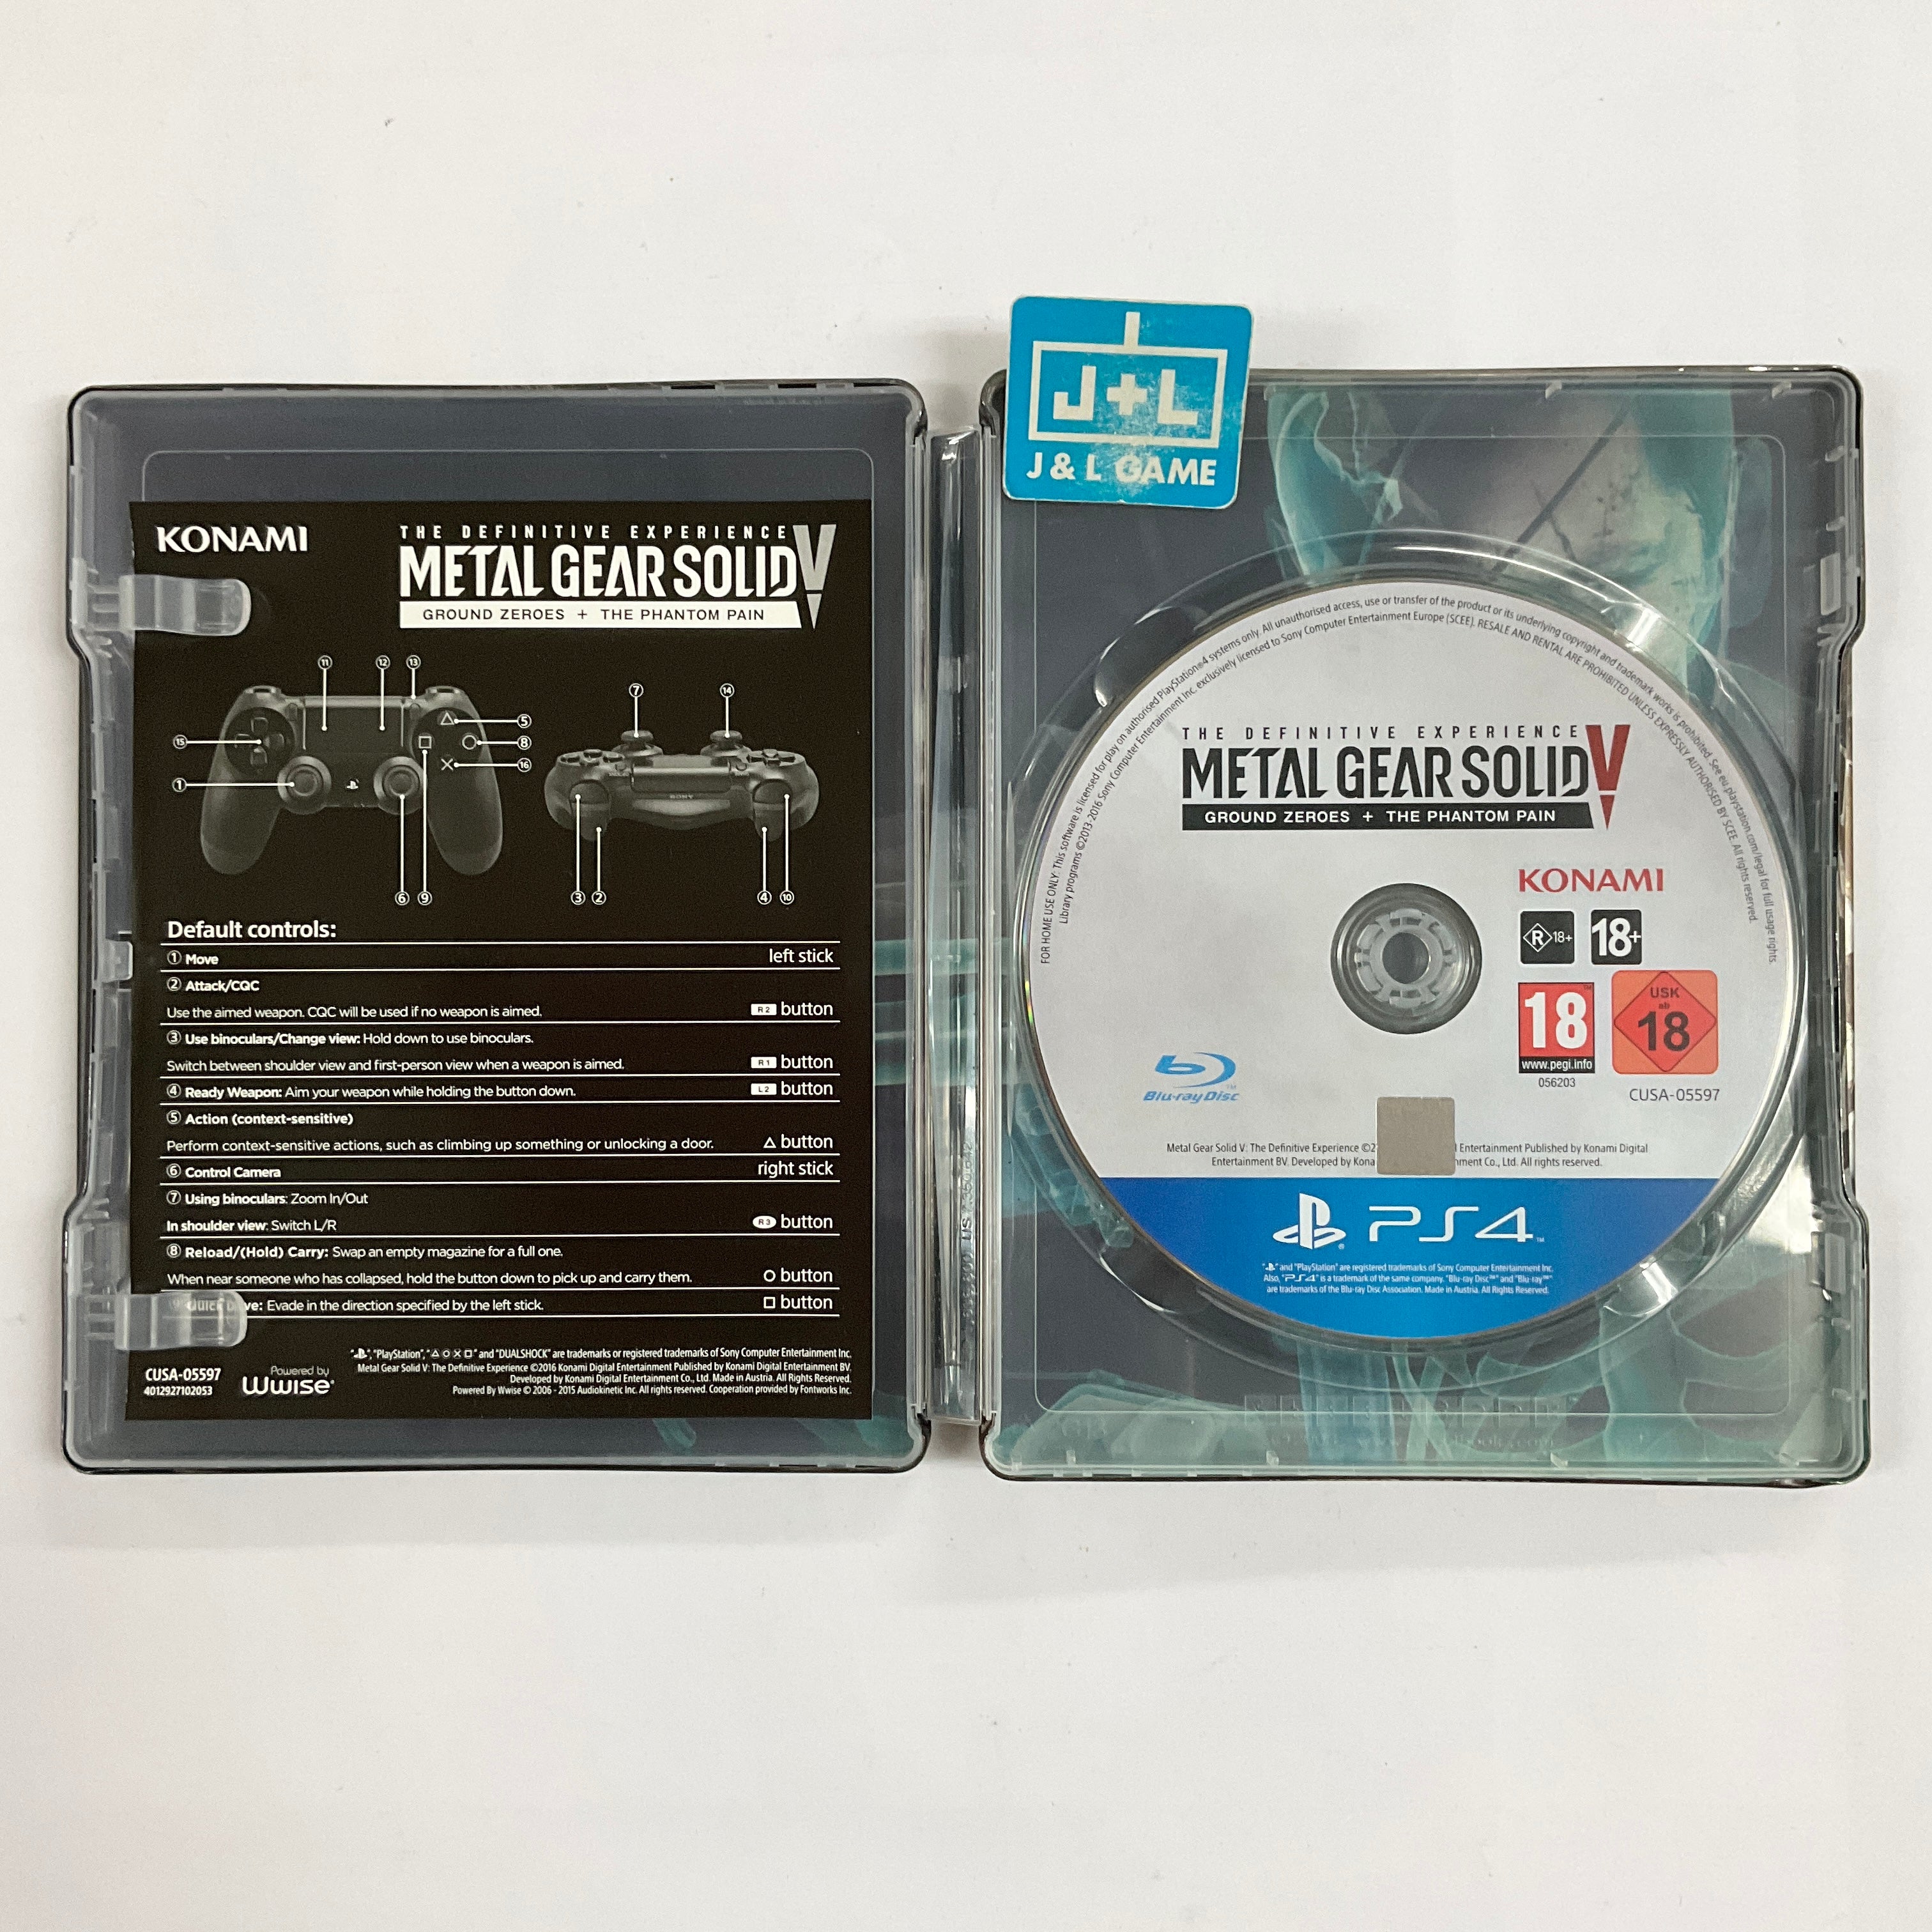 Metal Gear Solid V: The Definitive Experience (Steelbook) - (PS4) Playstation 4 [Pre-Owned] (European Import) Video Games Konami   